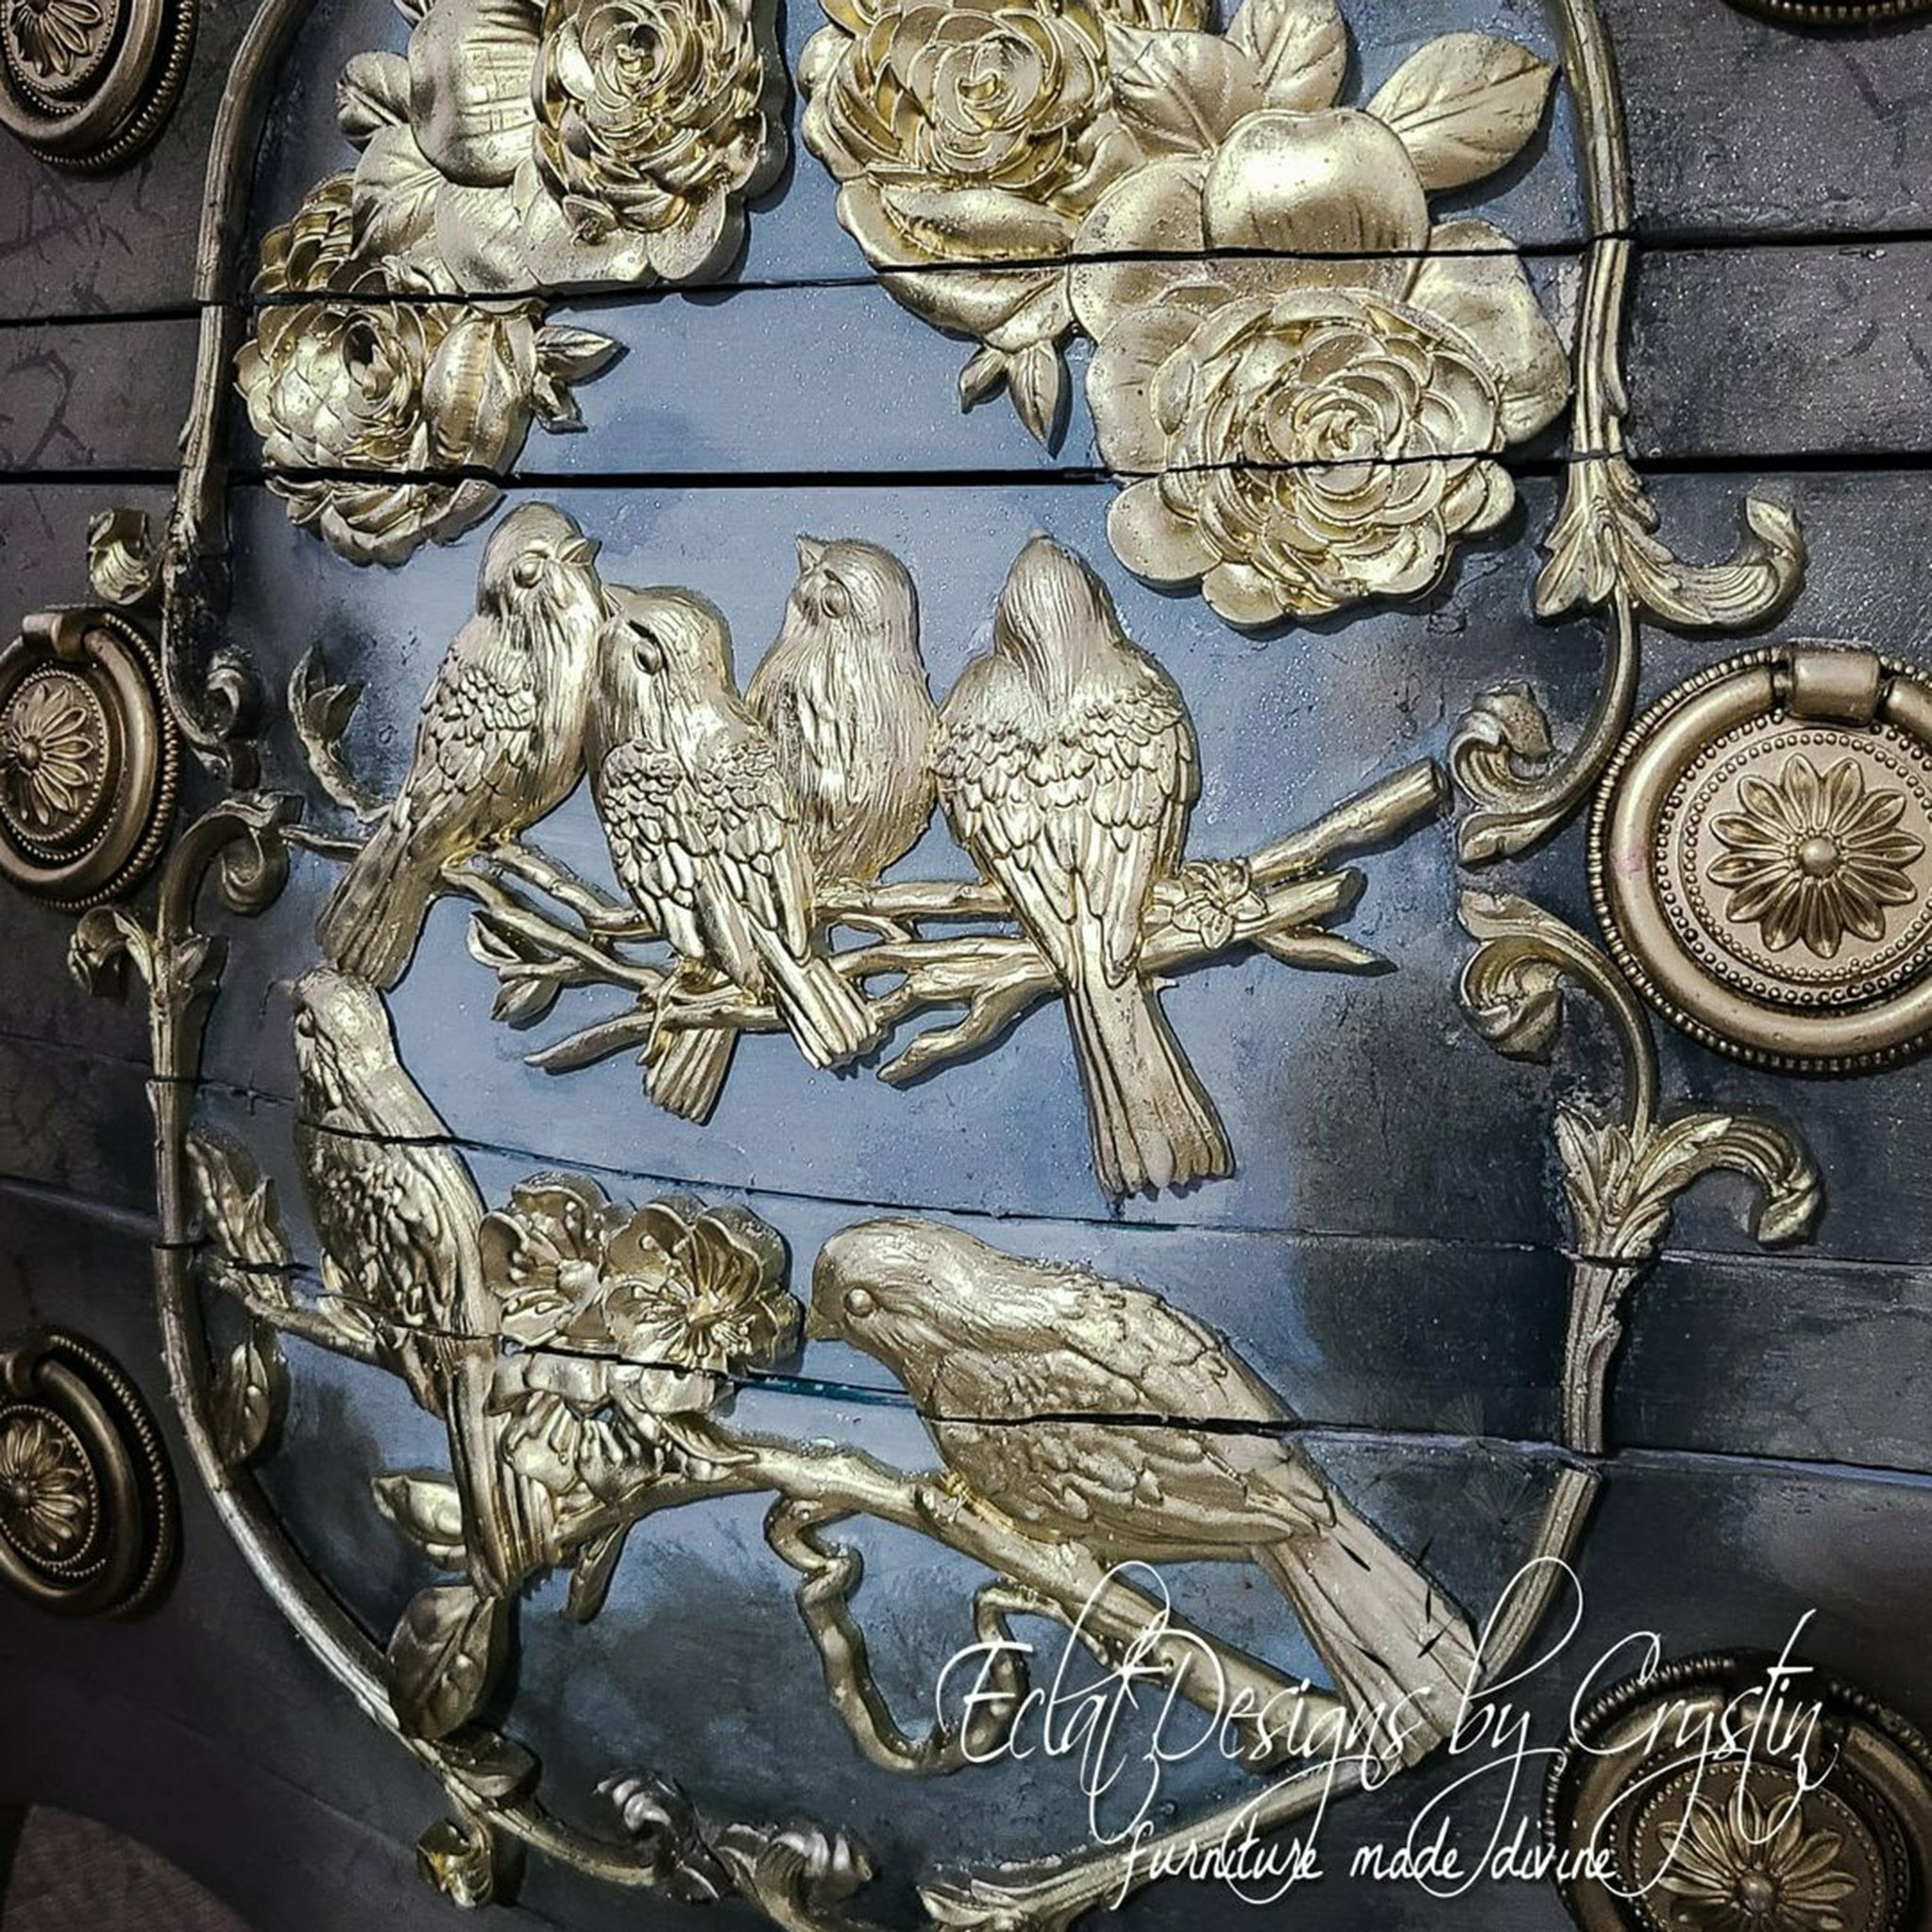 A close up of a black dresser with the blossoming spring and Victorian mold in gold. A white logo in the bottom right corner reading: Eclat designs by Crystin furniture made divine.